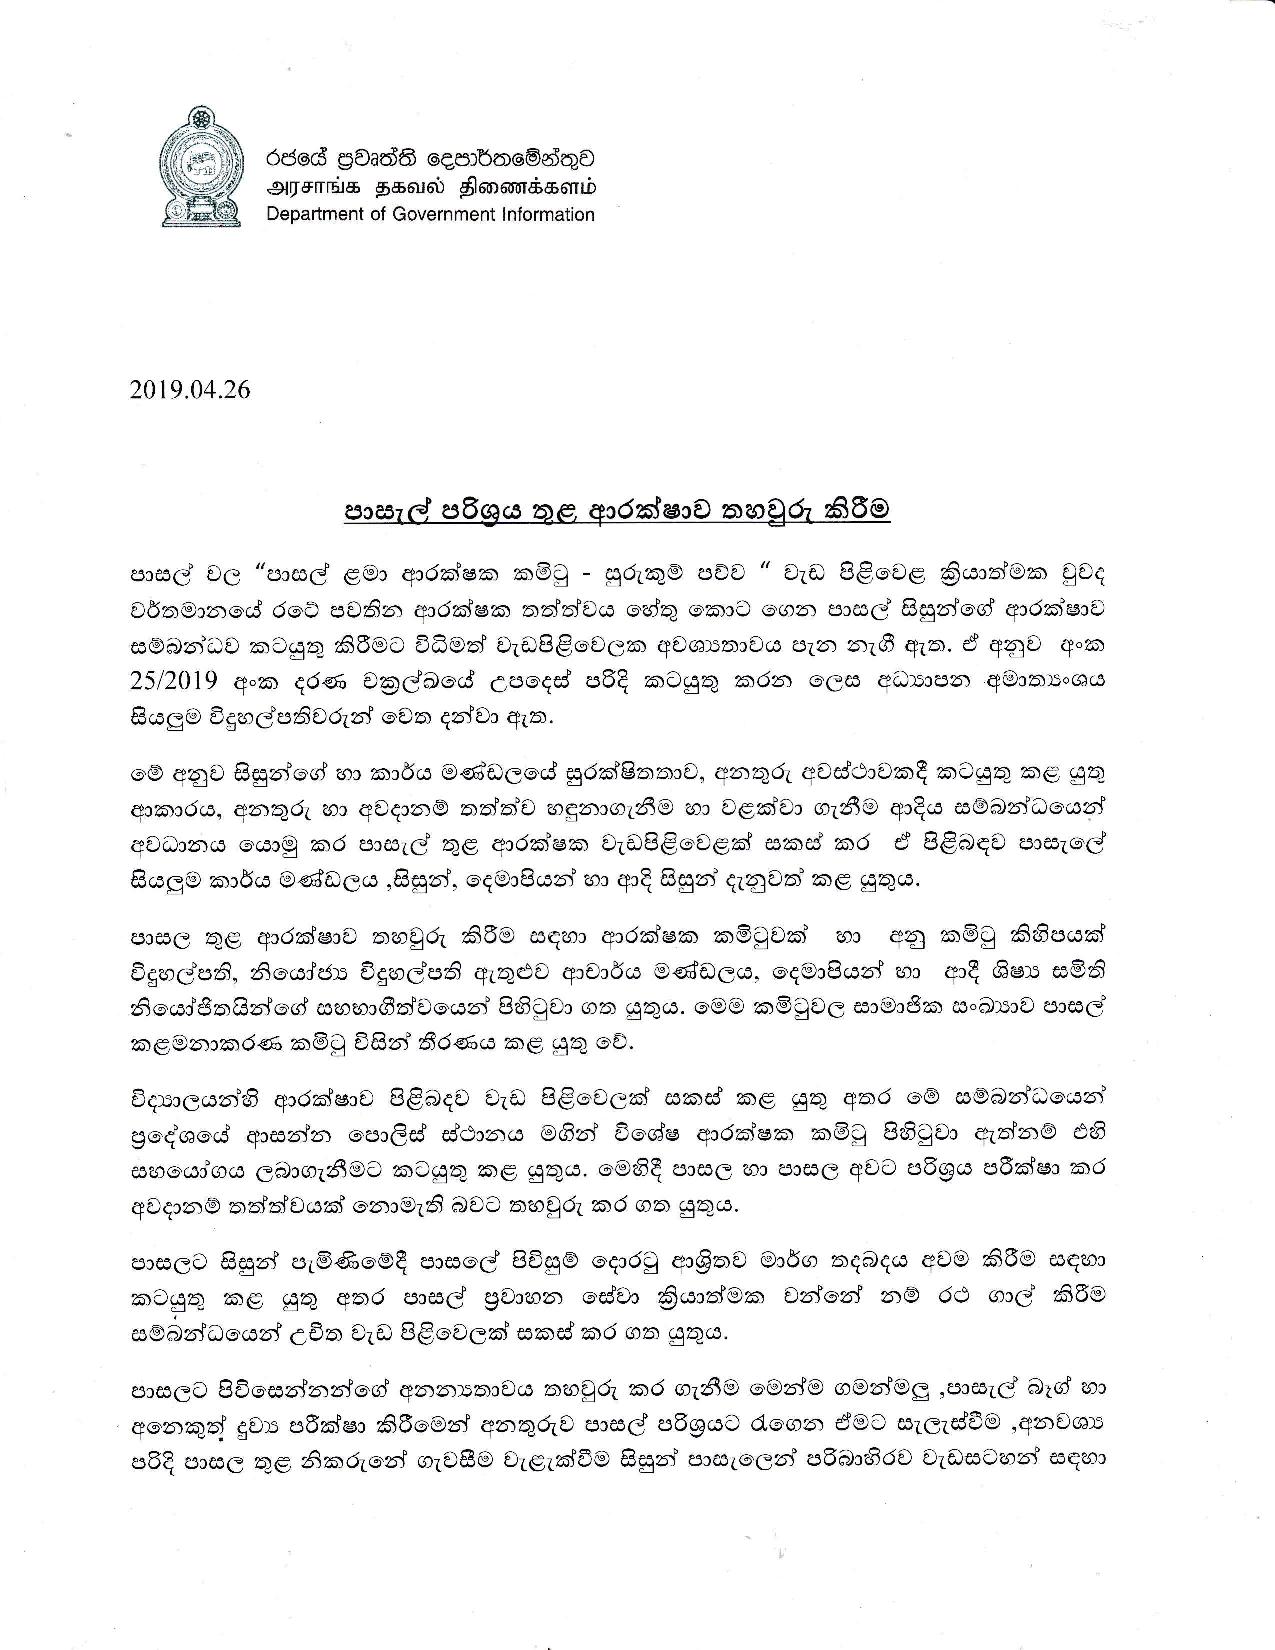 Media Release on 26.04.2019 page 001